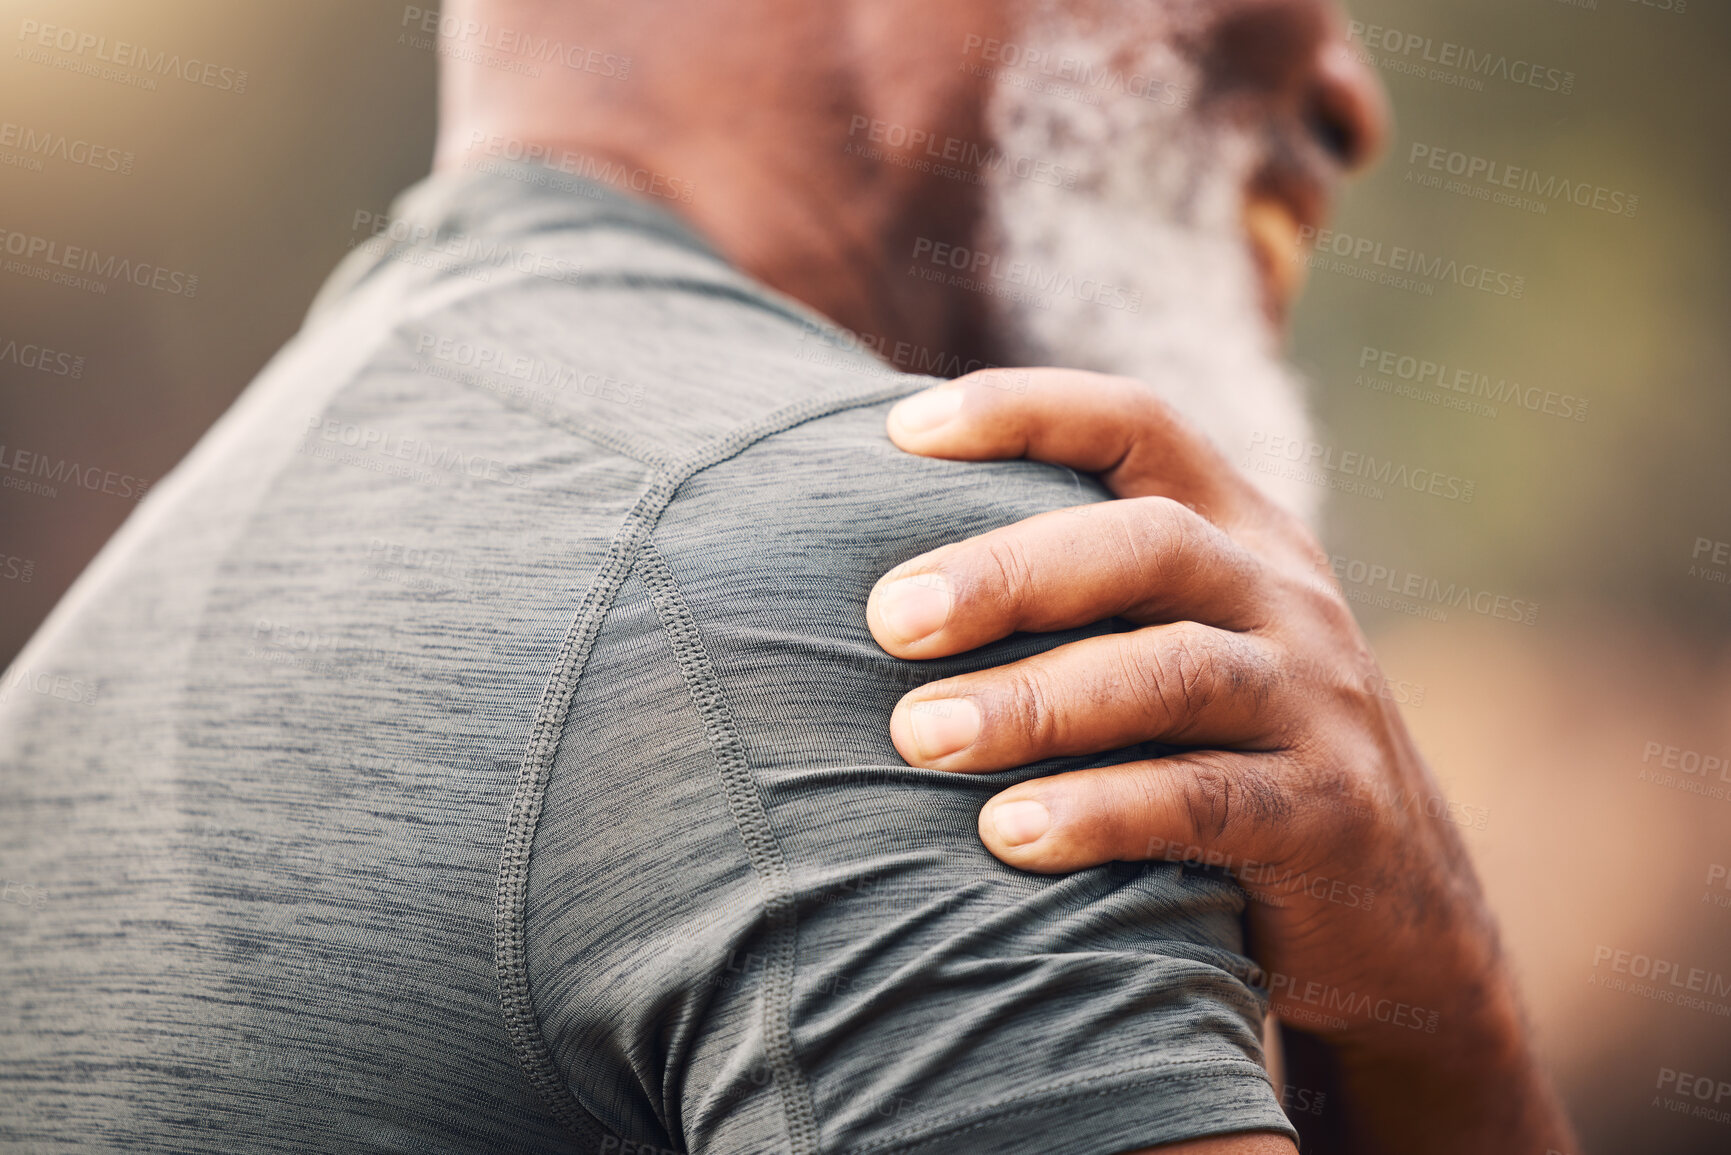 Buy stock photo Shoulder pain, injury and hand of senior black man after fitness accident outdoors. Sports, training and elderly male with fibromyalgia, inflammation or arthritis, broken bones or painful muscles.